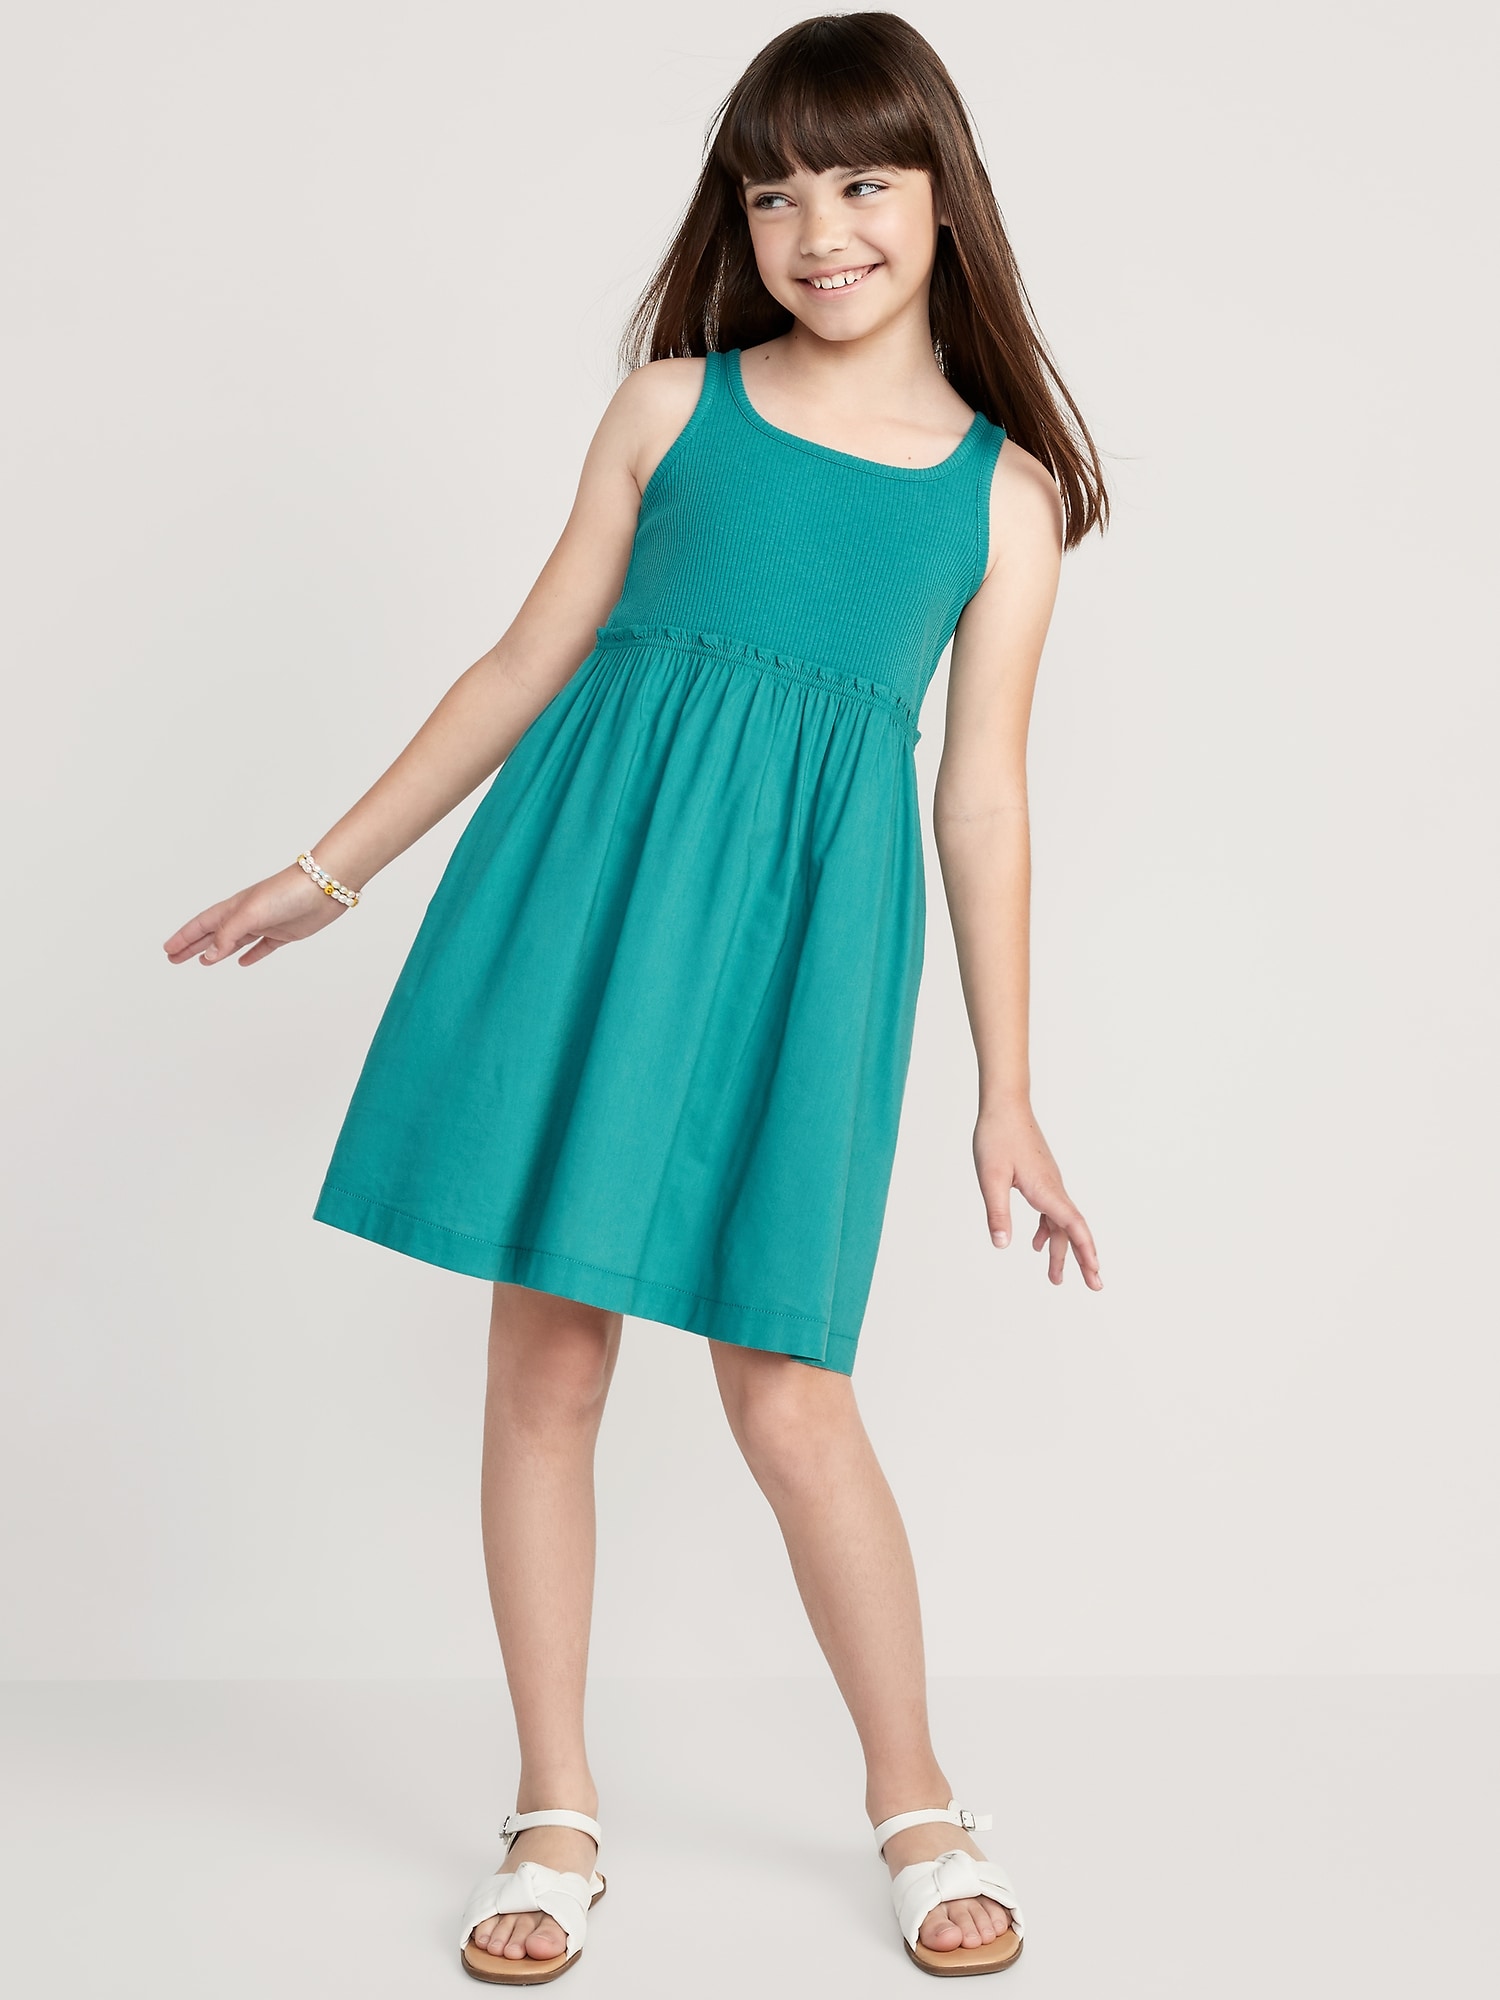 Old Navy Sleeveless Fit & Flare Dress for Girls green. 1